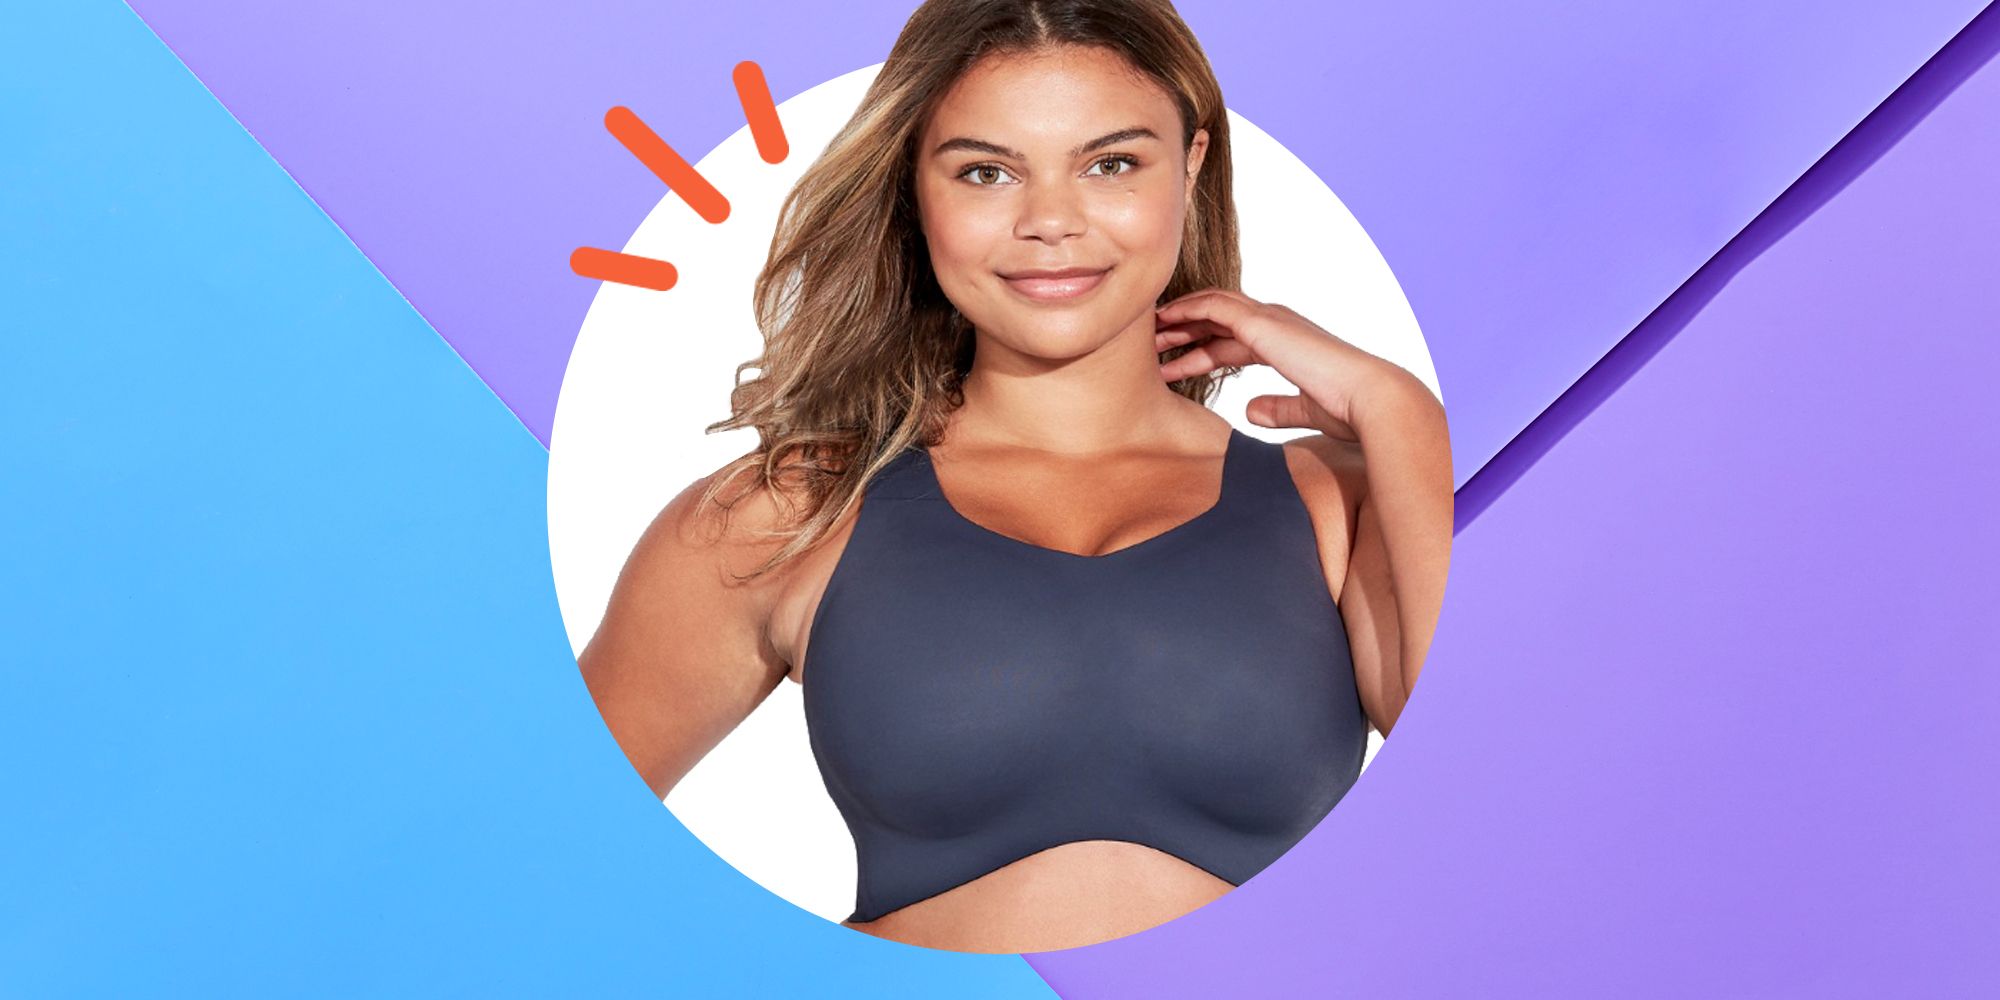 Anyone have experience with Forme sports bra? : r/bigboobproblems